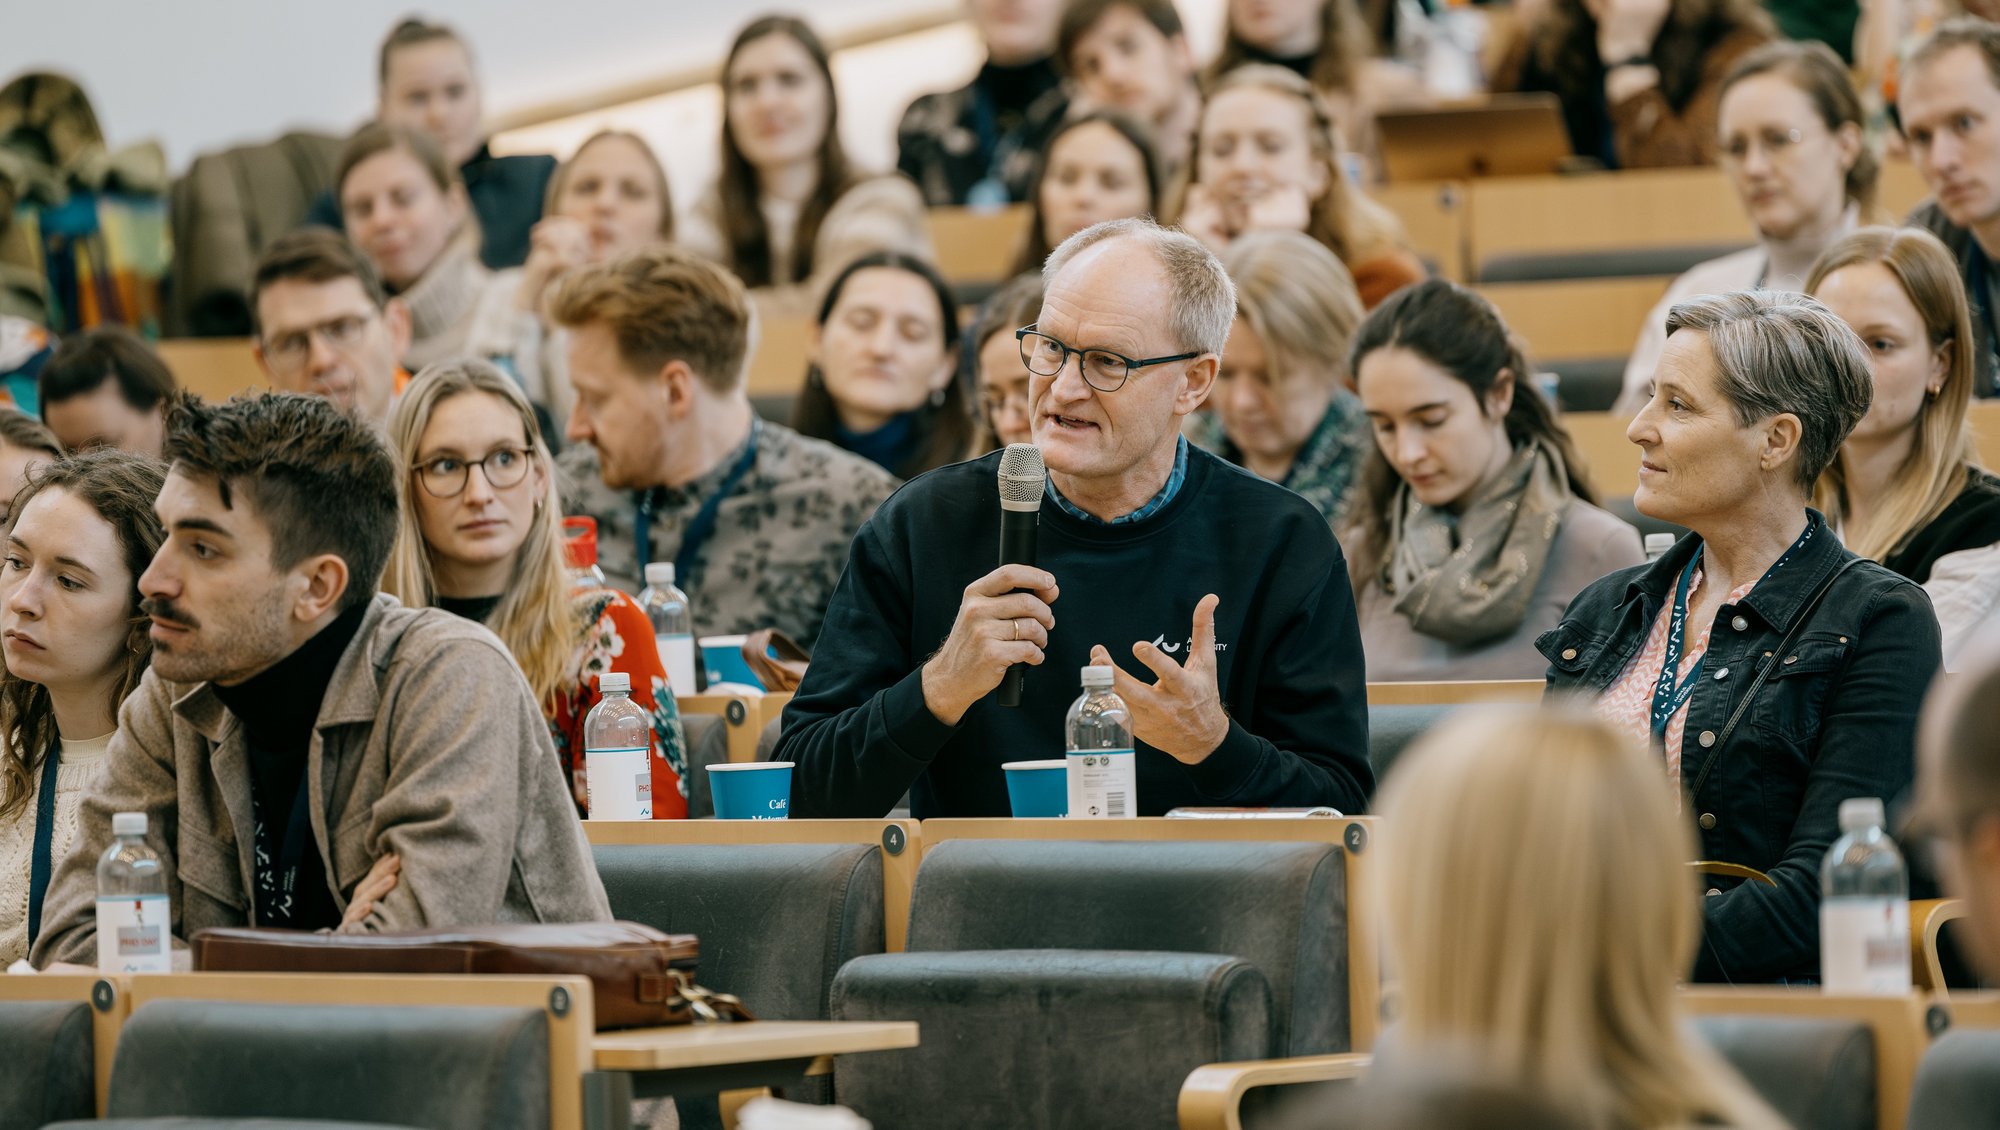 There is plenty of opportunity to ask questions to the speakers. Photo: Jens Hartmann Schmidt, AU Photo.